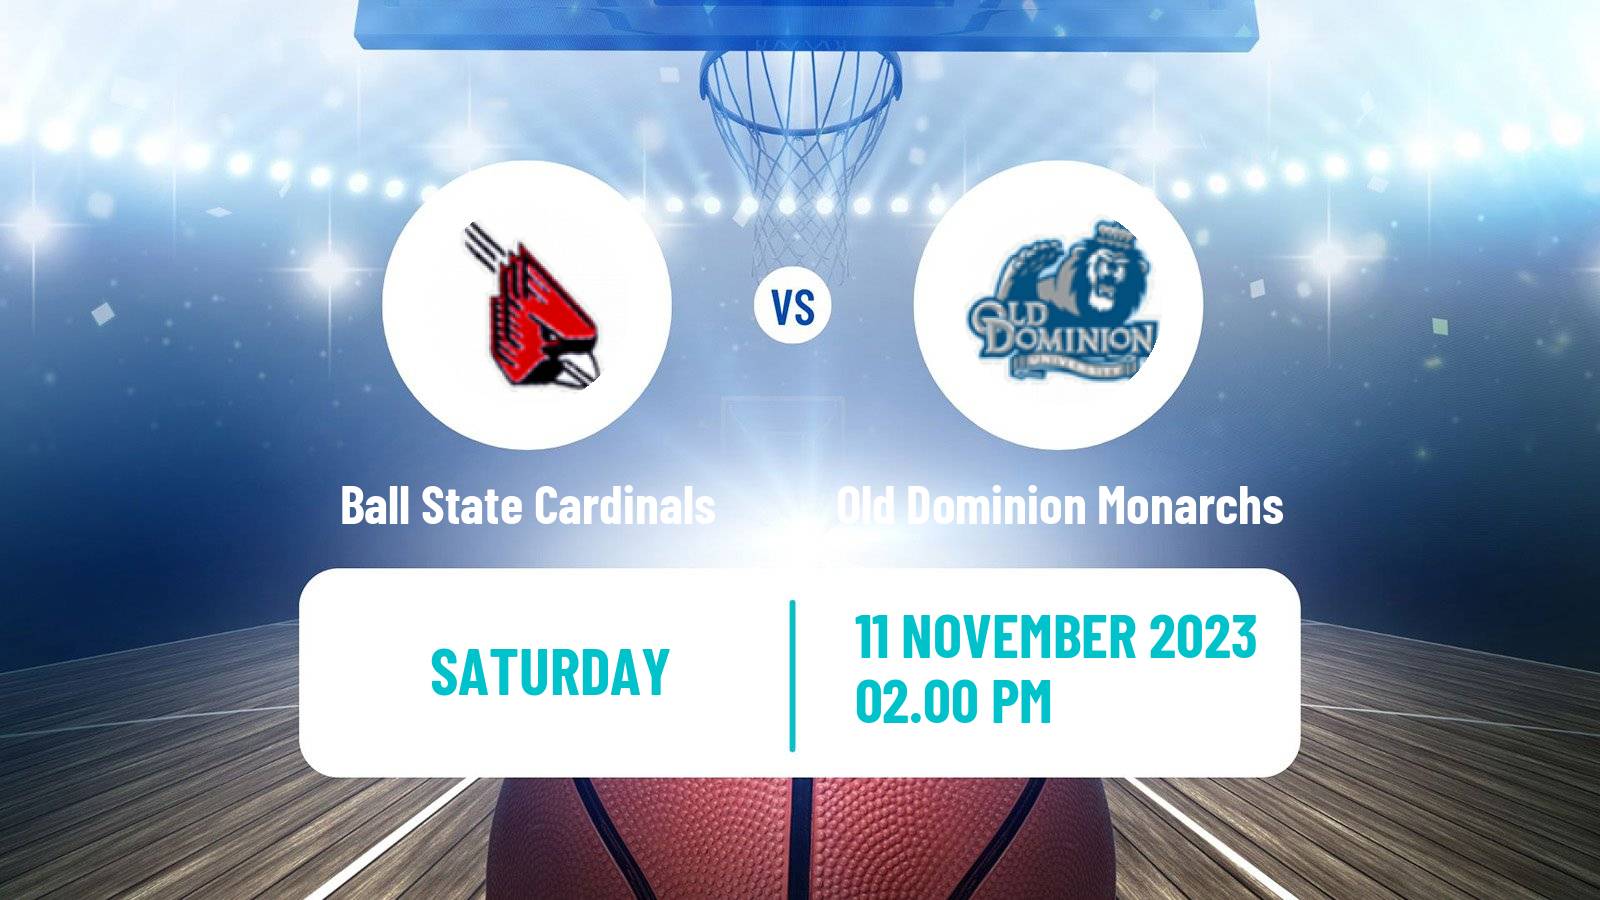 Basketball NCAA College Basketball Ball State Cardinals - Old Dominion Monarchs